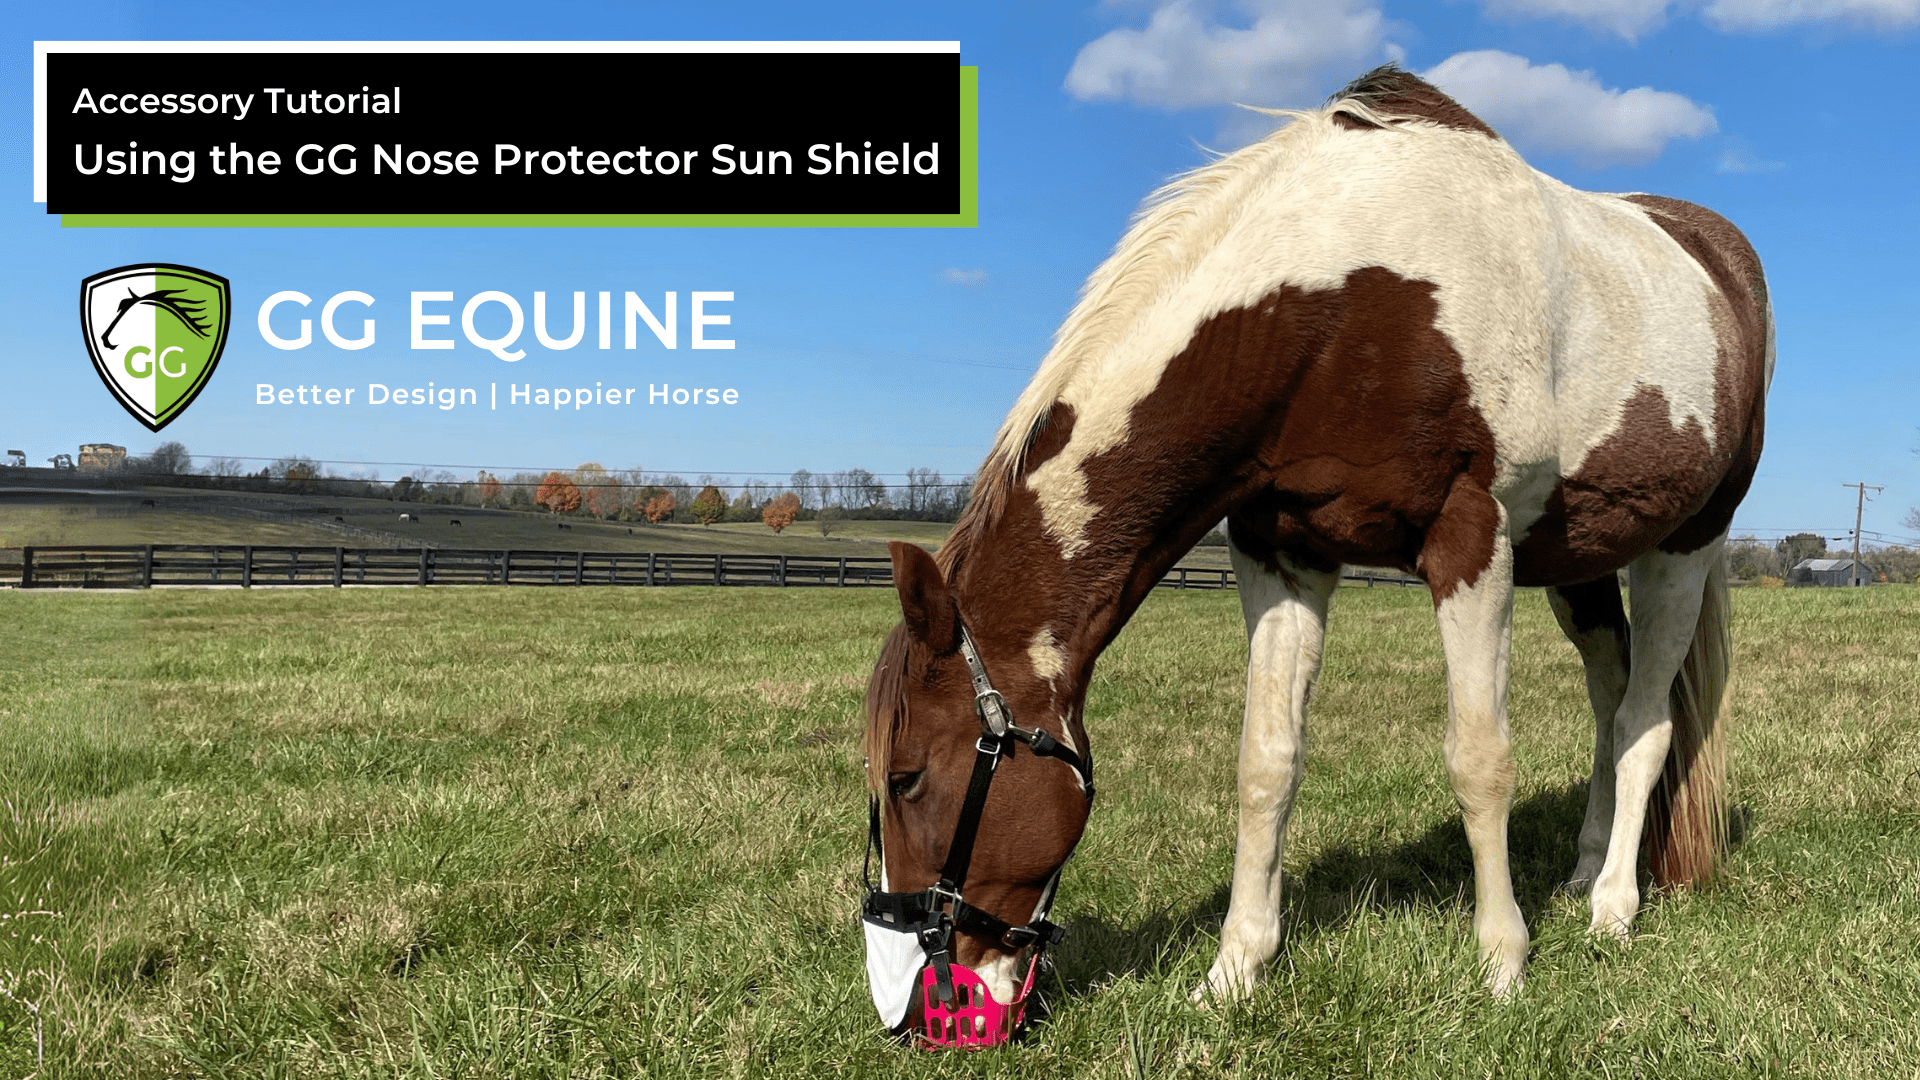 Cargar vídeo: Introducing the GG Nose Protector Sun Shield, to help horses with sensitive skin and safeguard against dew poisoning.